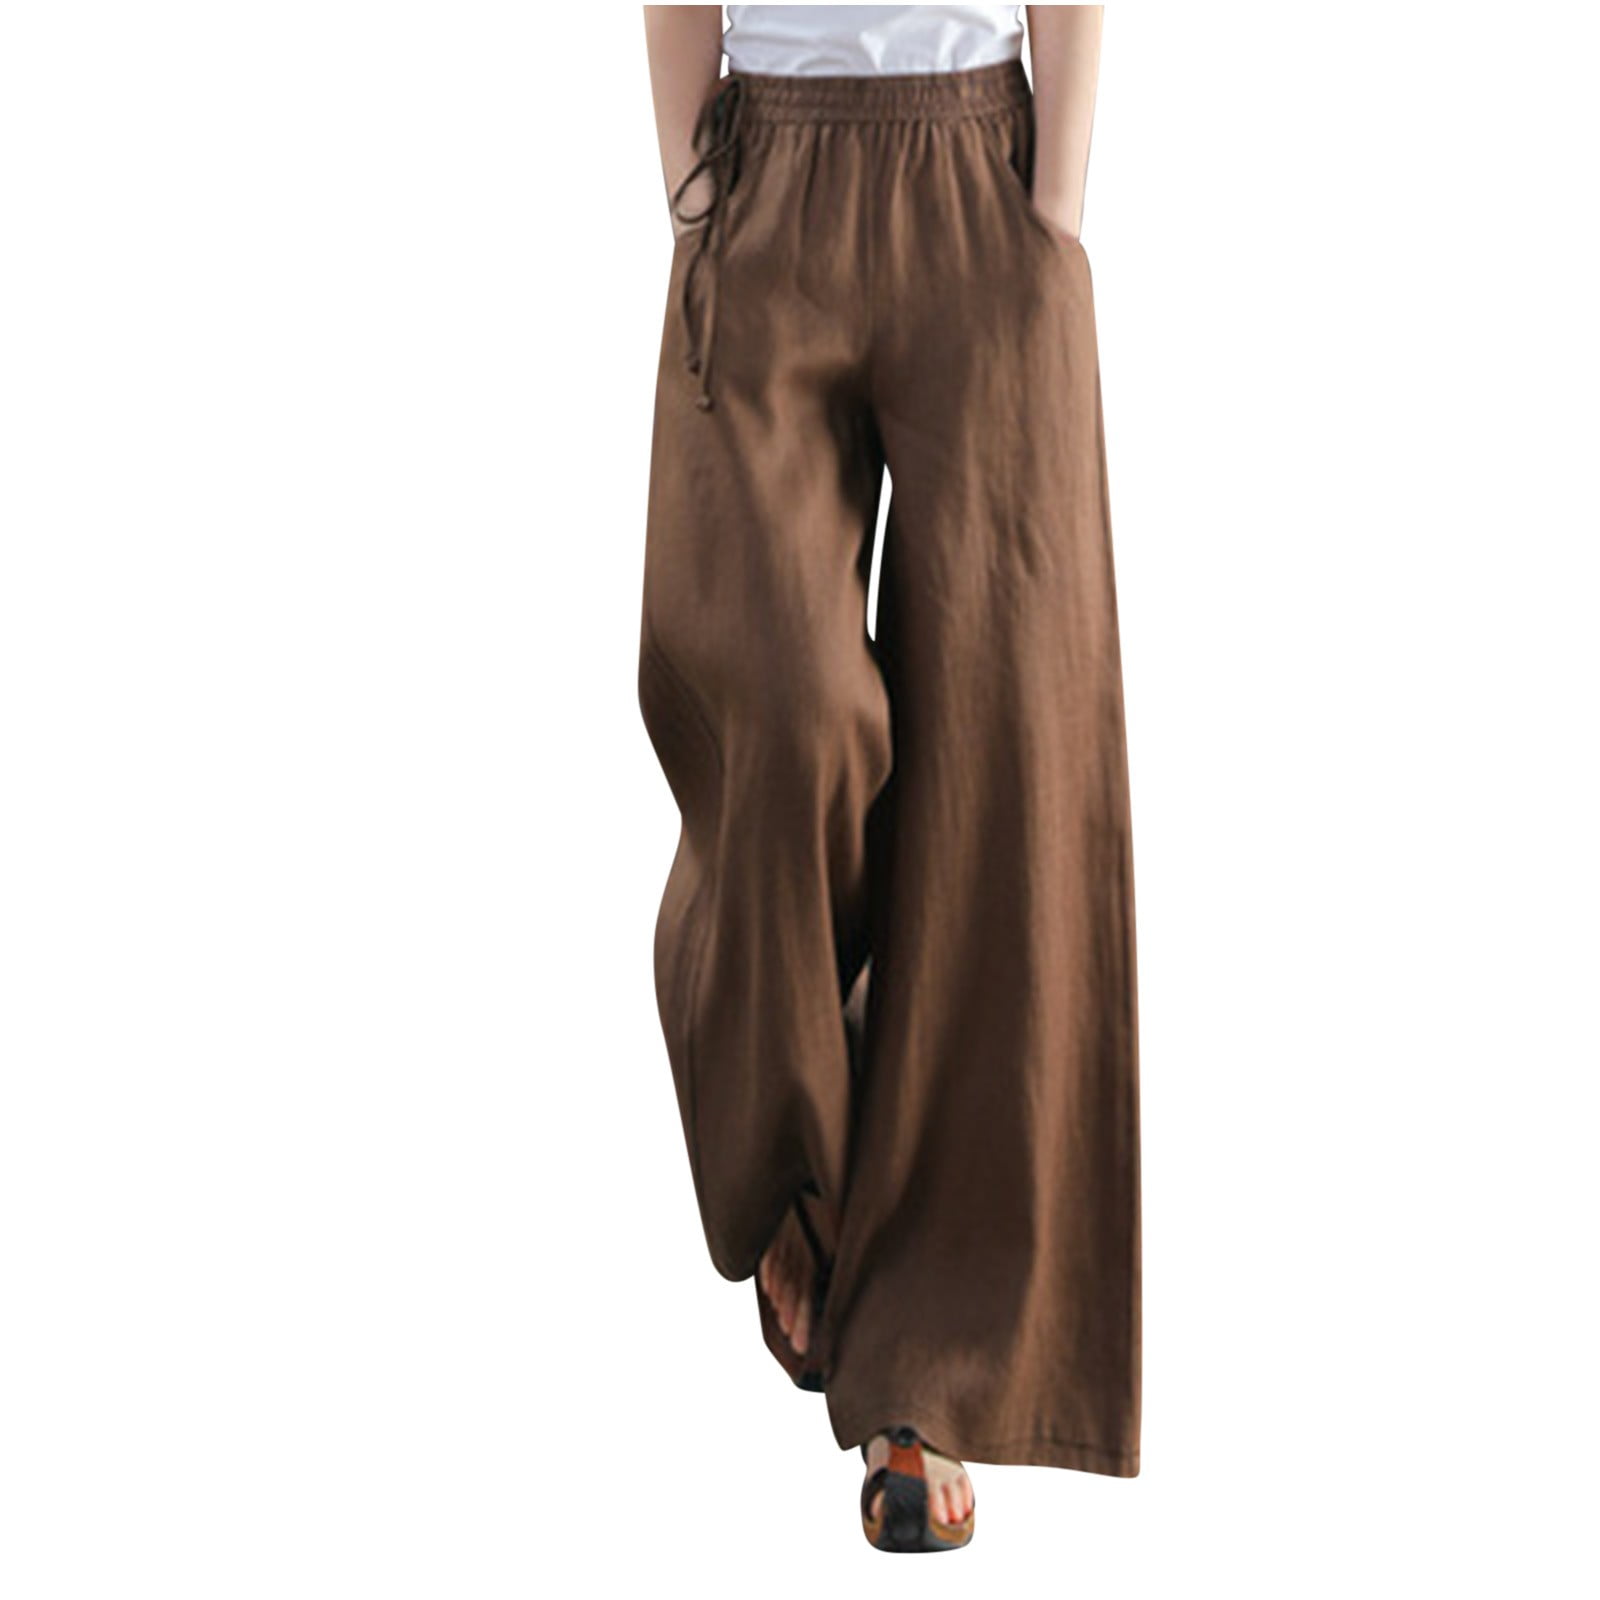 Womens Lounge Pants Cotton Linen Lightweight Wide Leg Pants for Women  Casual Loose Fitting Solid Slacks Trousers (4X-Large, CoffeeA)